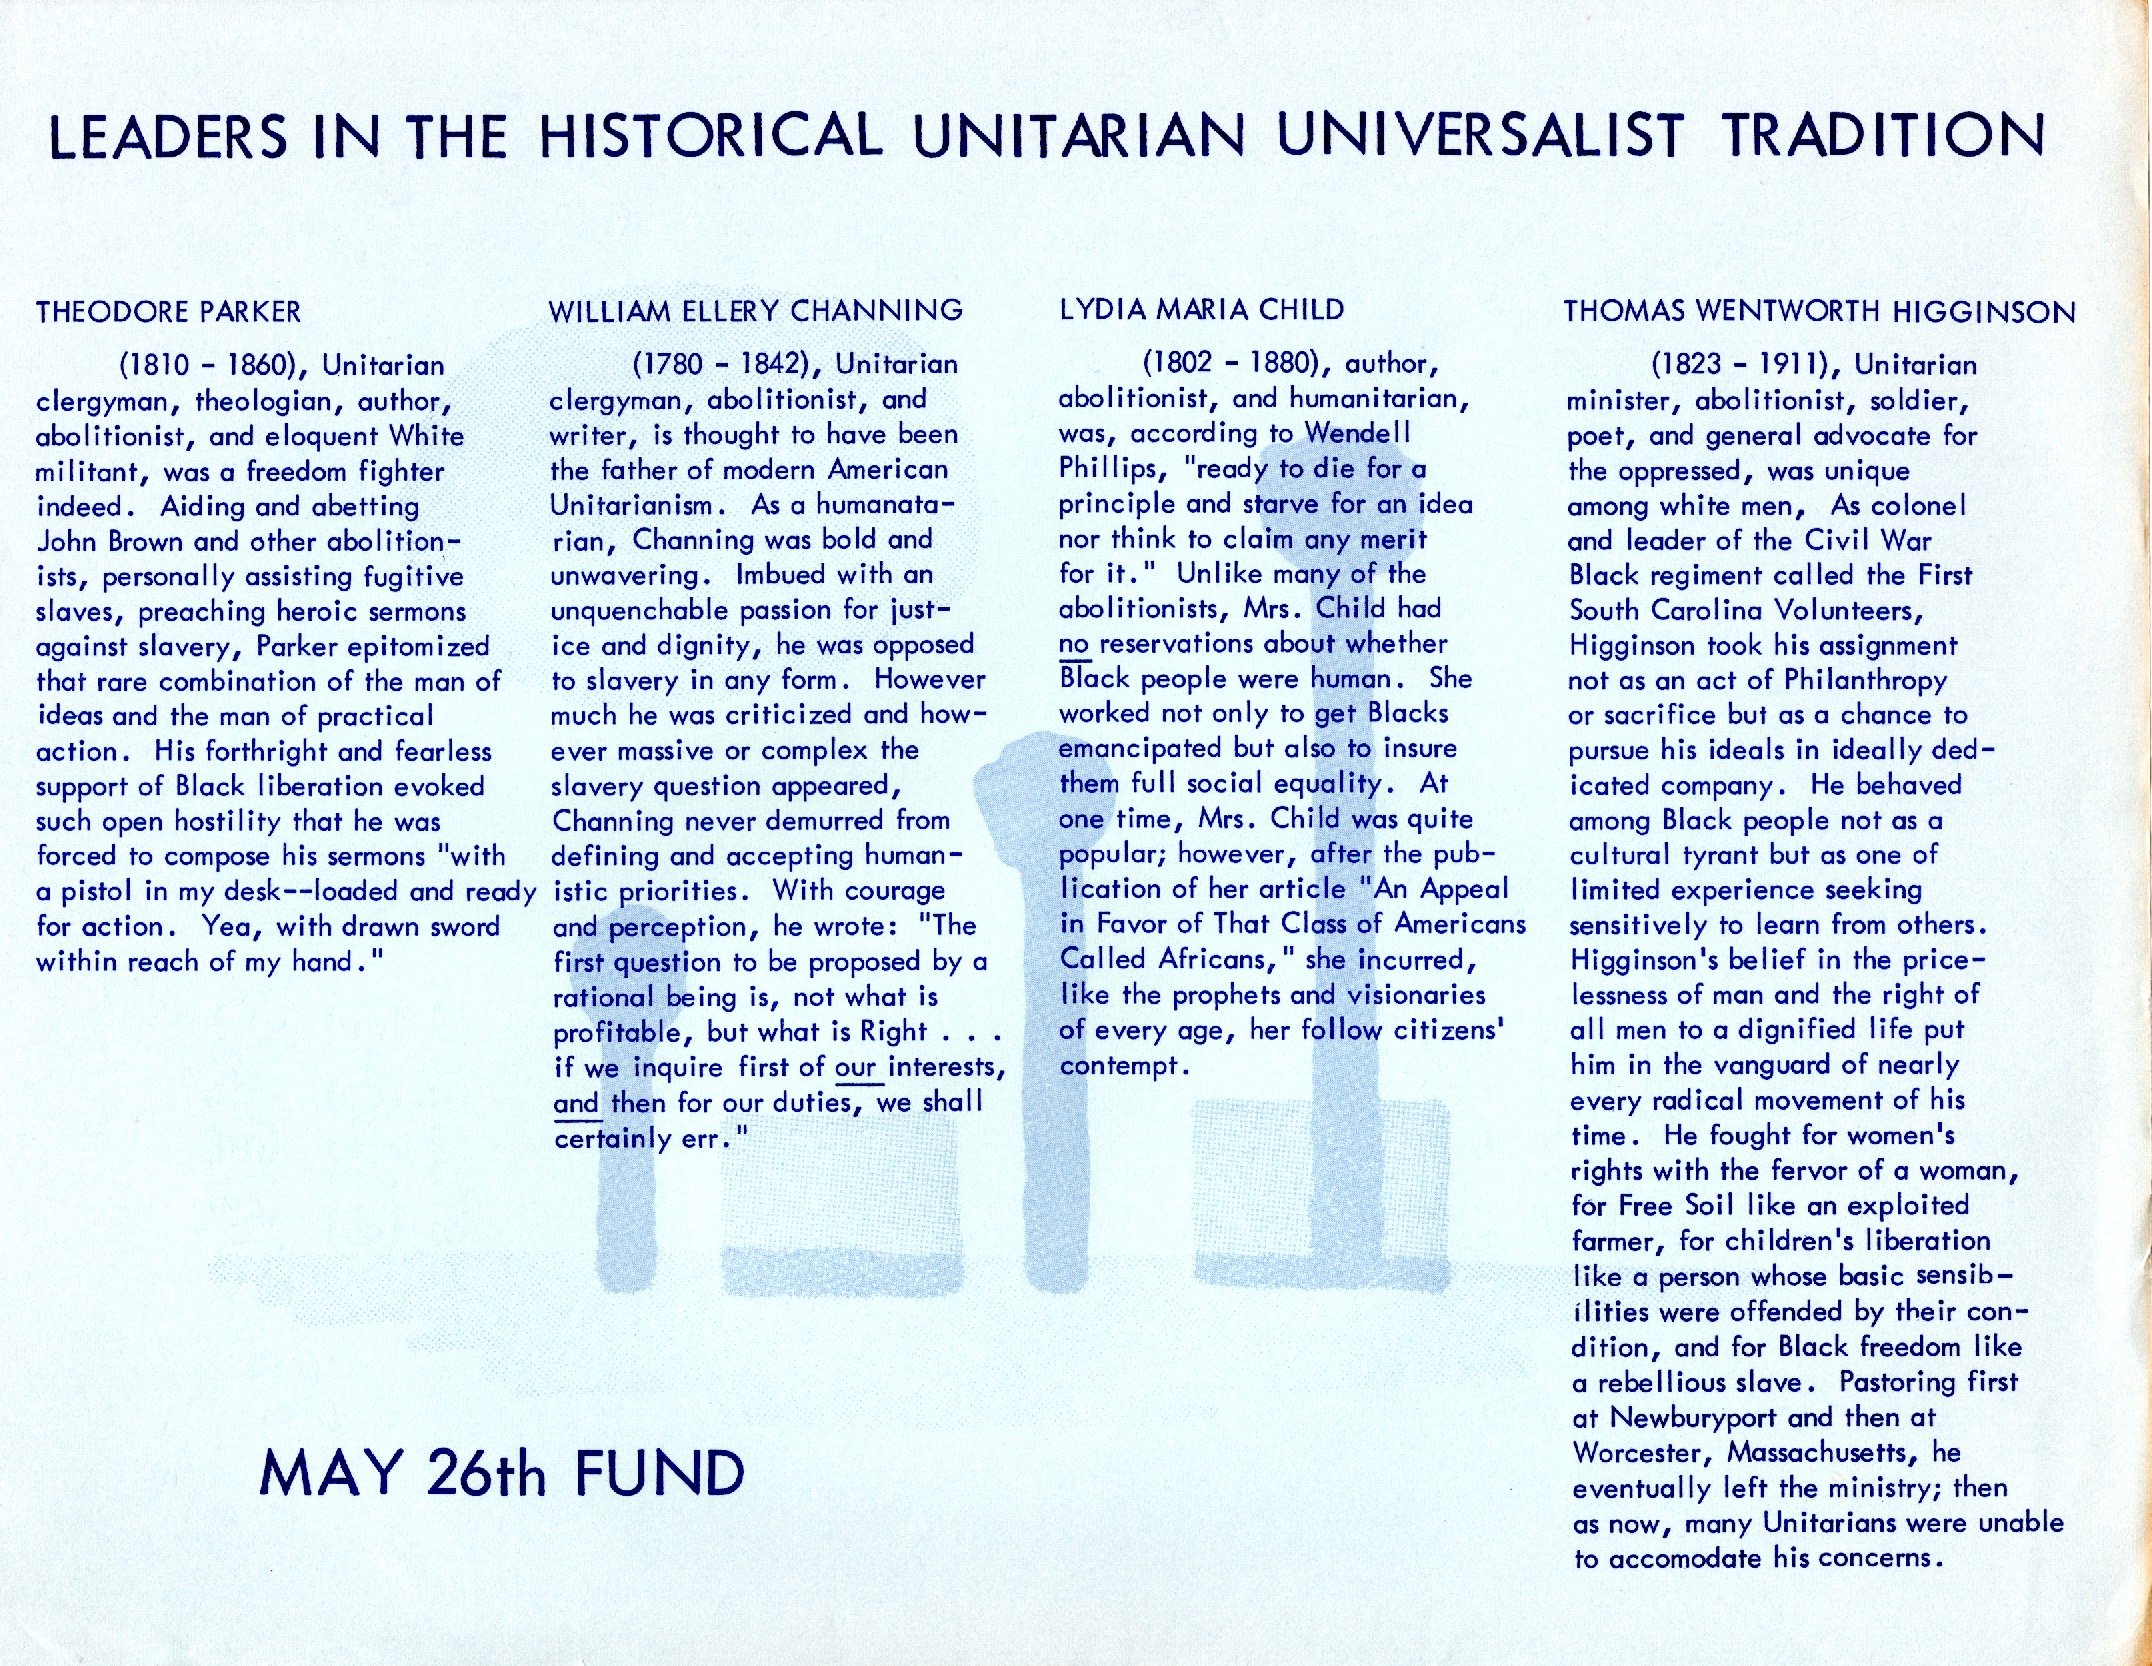 1970.8.19 Letter from Don McKinney to Fritchman re May 26 fund_0004.jpg